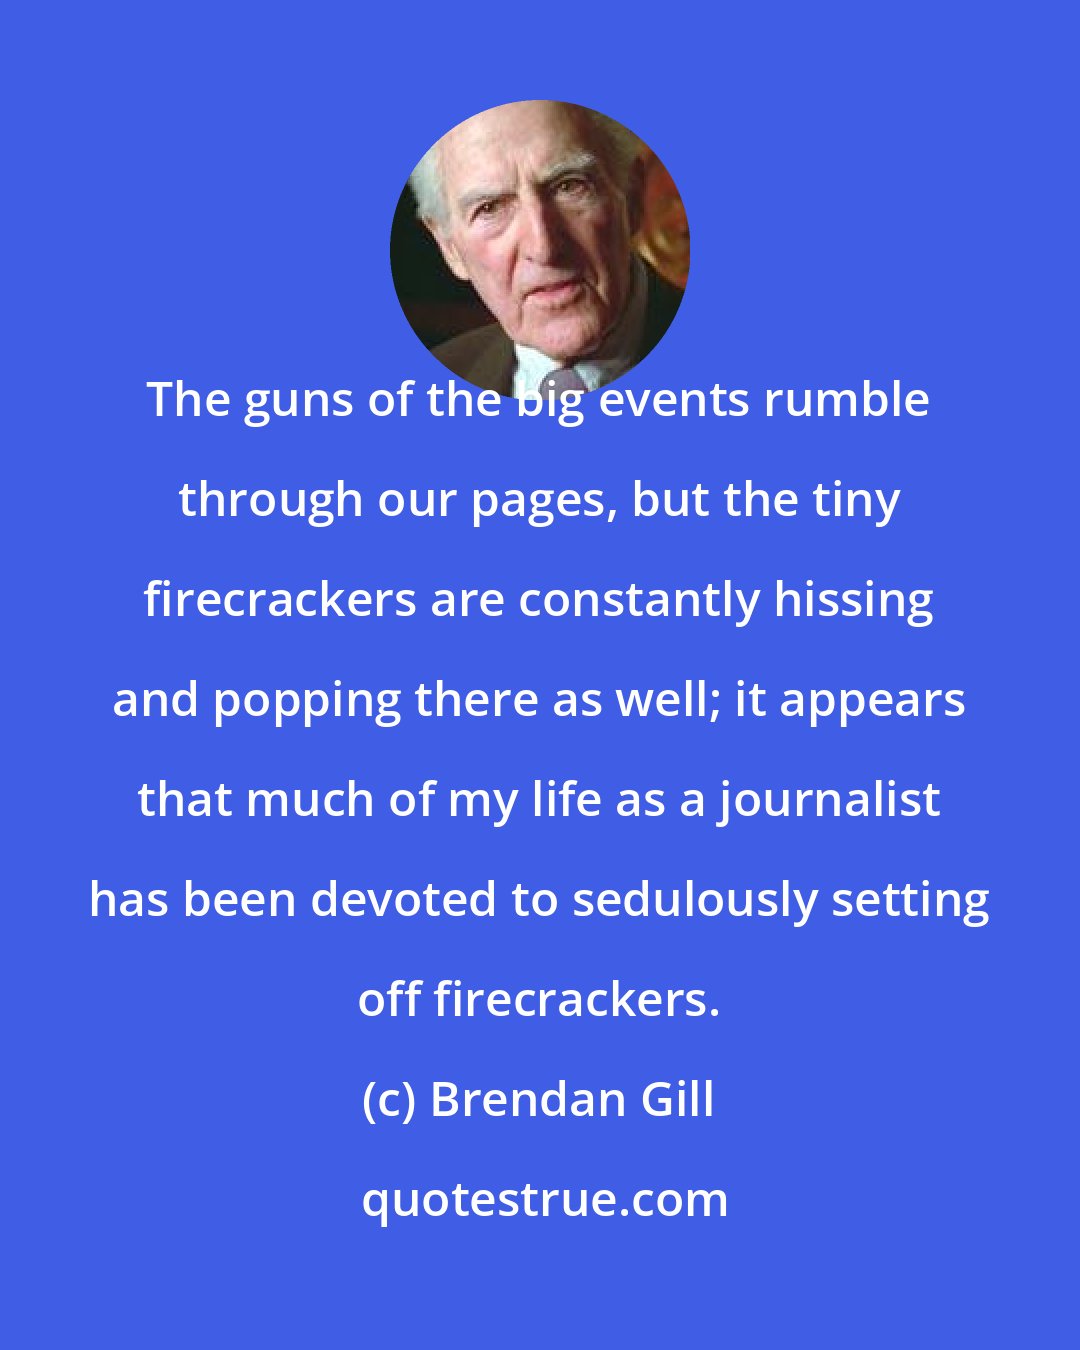 Brendan Gill: The guns of the big events rumble through our pages, but the tiny firecrackers are constantly hissing and popping there as well; it appears that much of my life as a journalist has been devoted to sedulously setting off firecrackers.